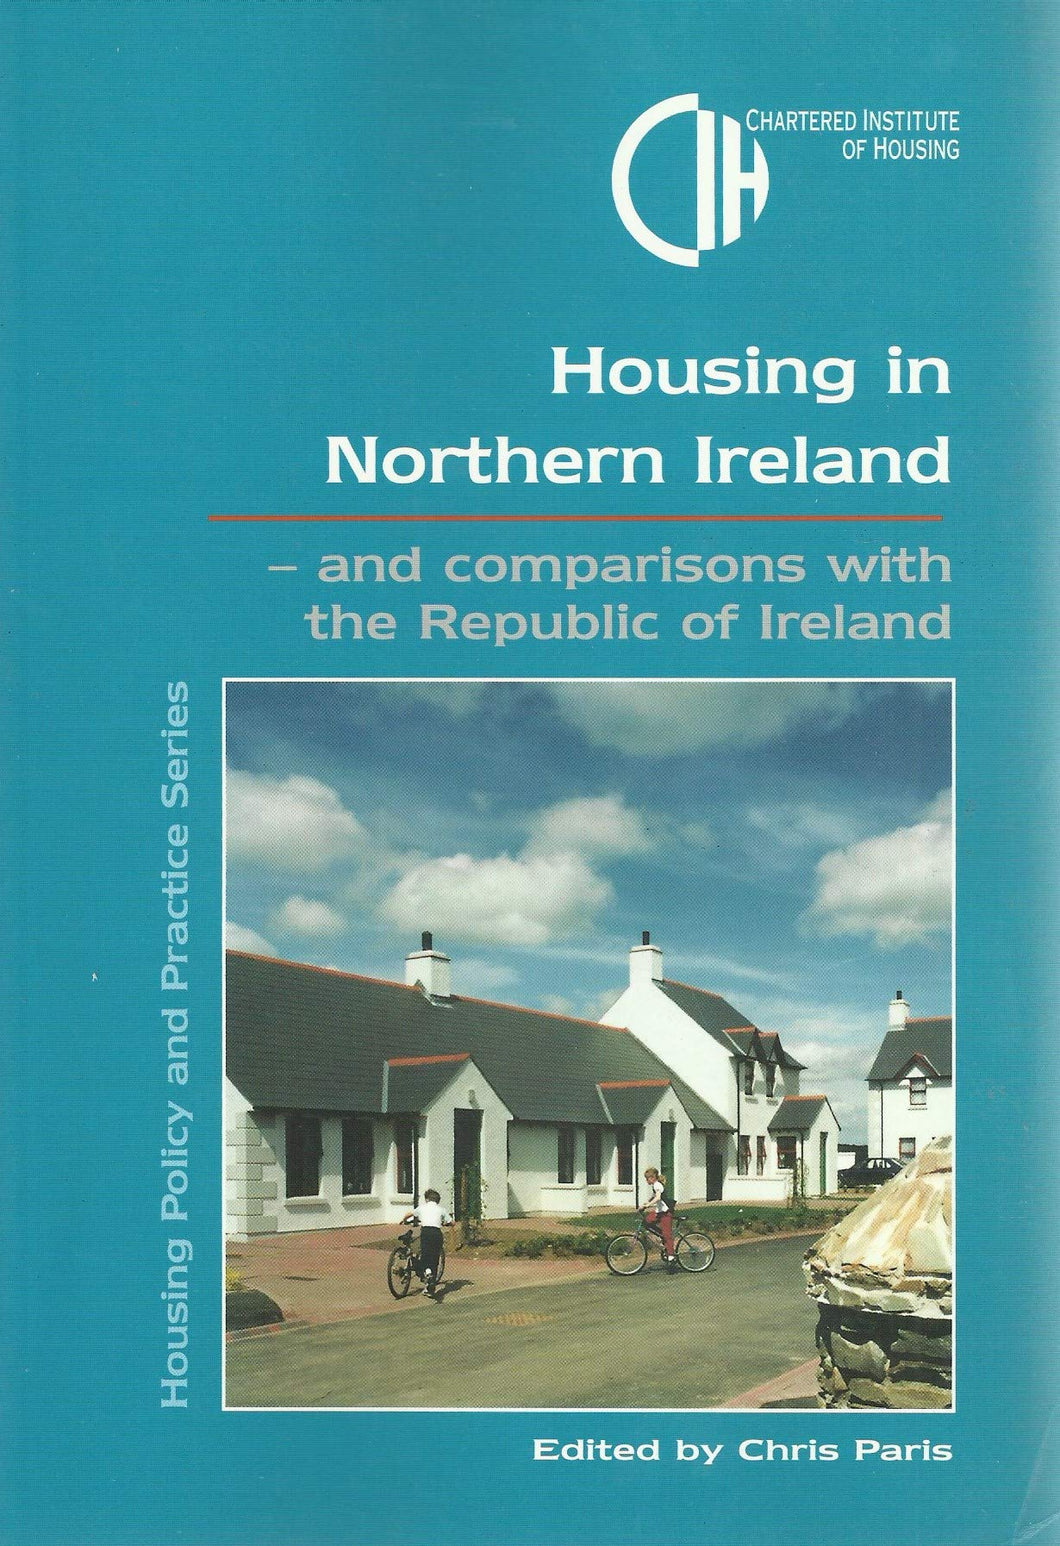 Housing in Northern Ireland (Policy and practice series)